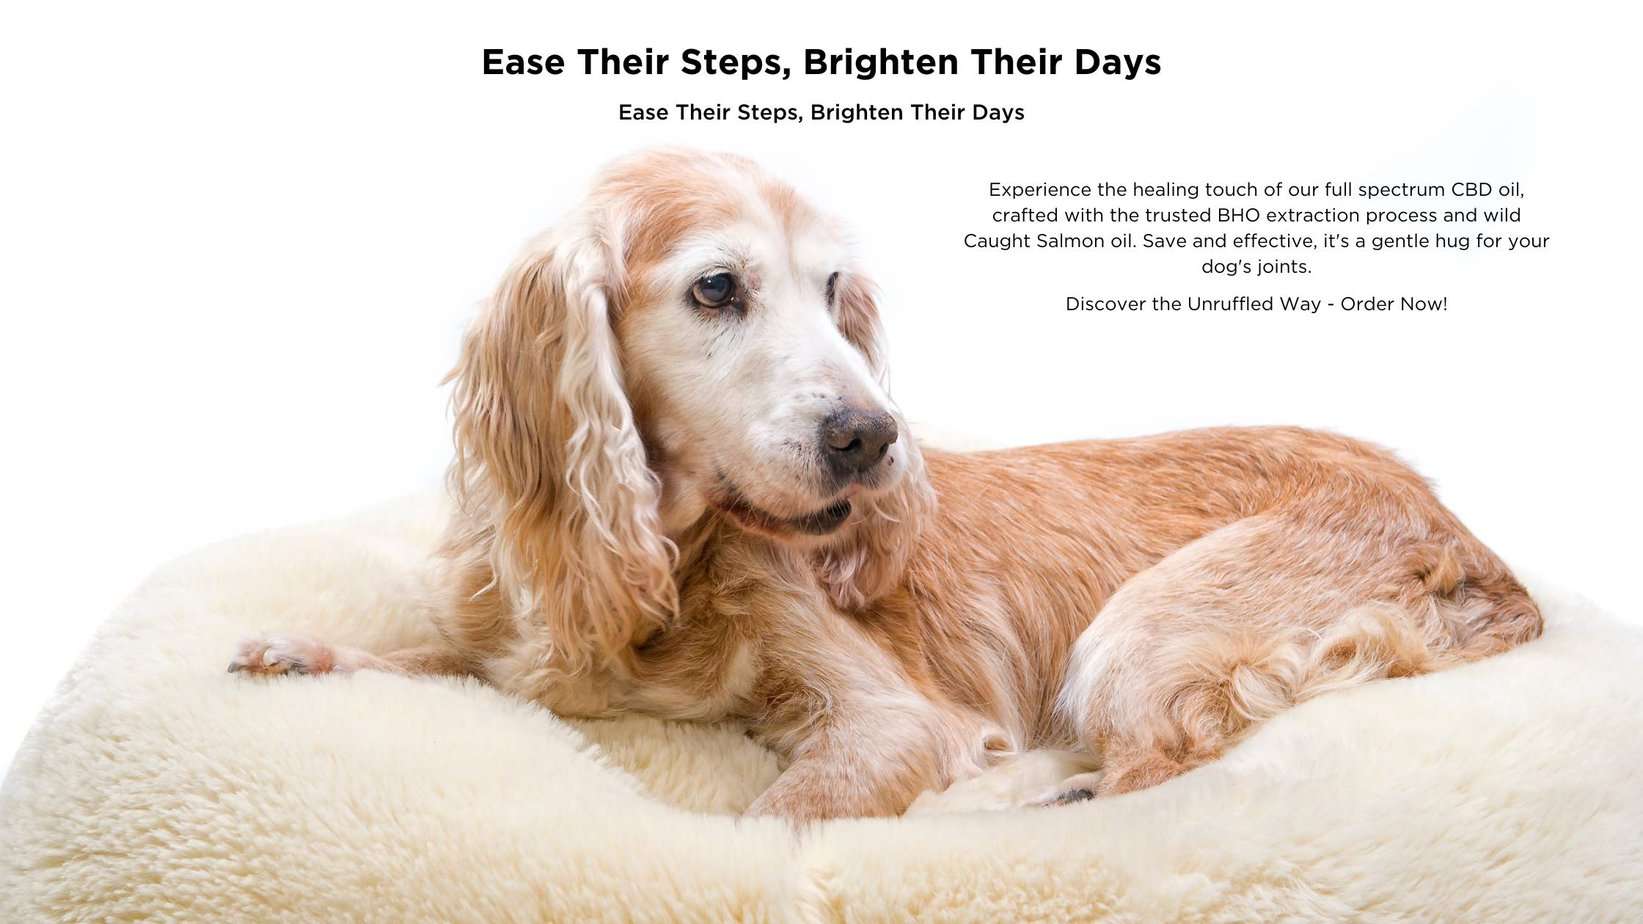 An older setter resting comfortably on a dog bed, with the text 'Ease Their Steps, Brighten Their Days. Experience the healing touch of our full spectrum CBD oil, crafted with the trusted BHO extraction process and wild Caught Salmon oil. Safe and effective, it's a gentle hug for your dog's joints.' A photo of Unruffled CBD oil for Pets is also shown.